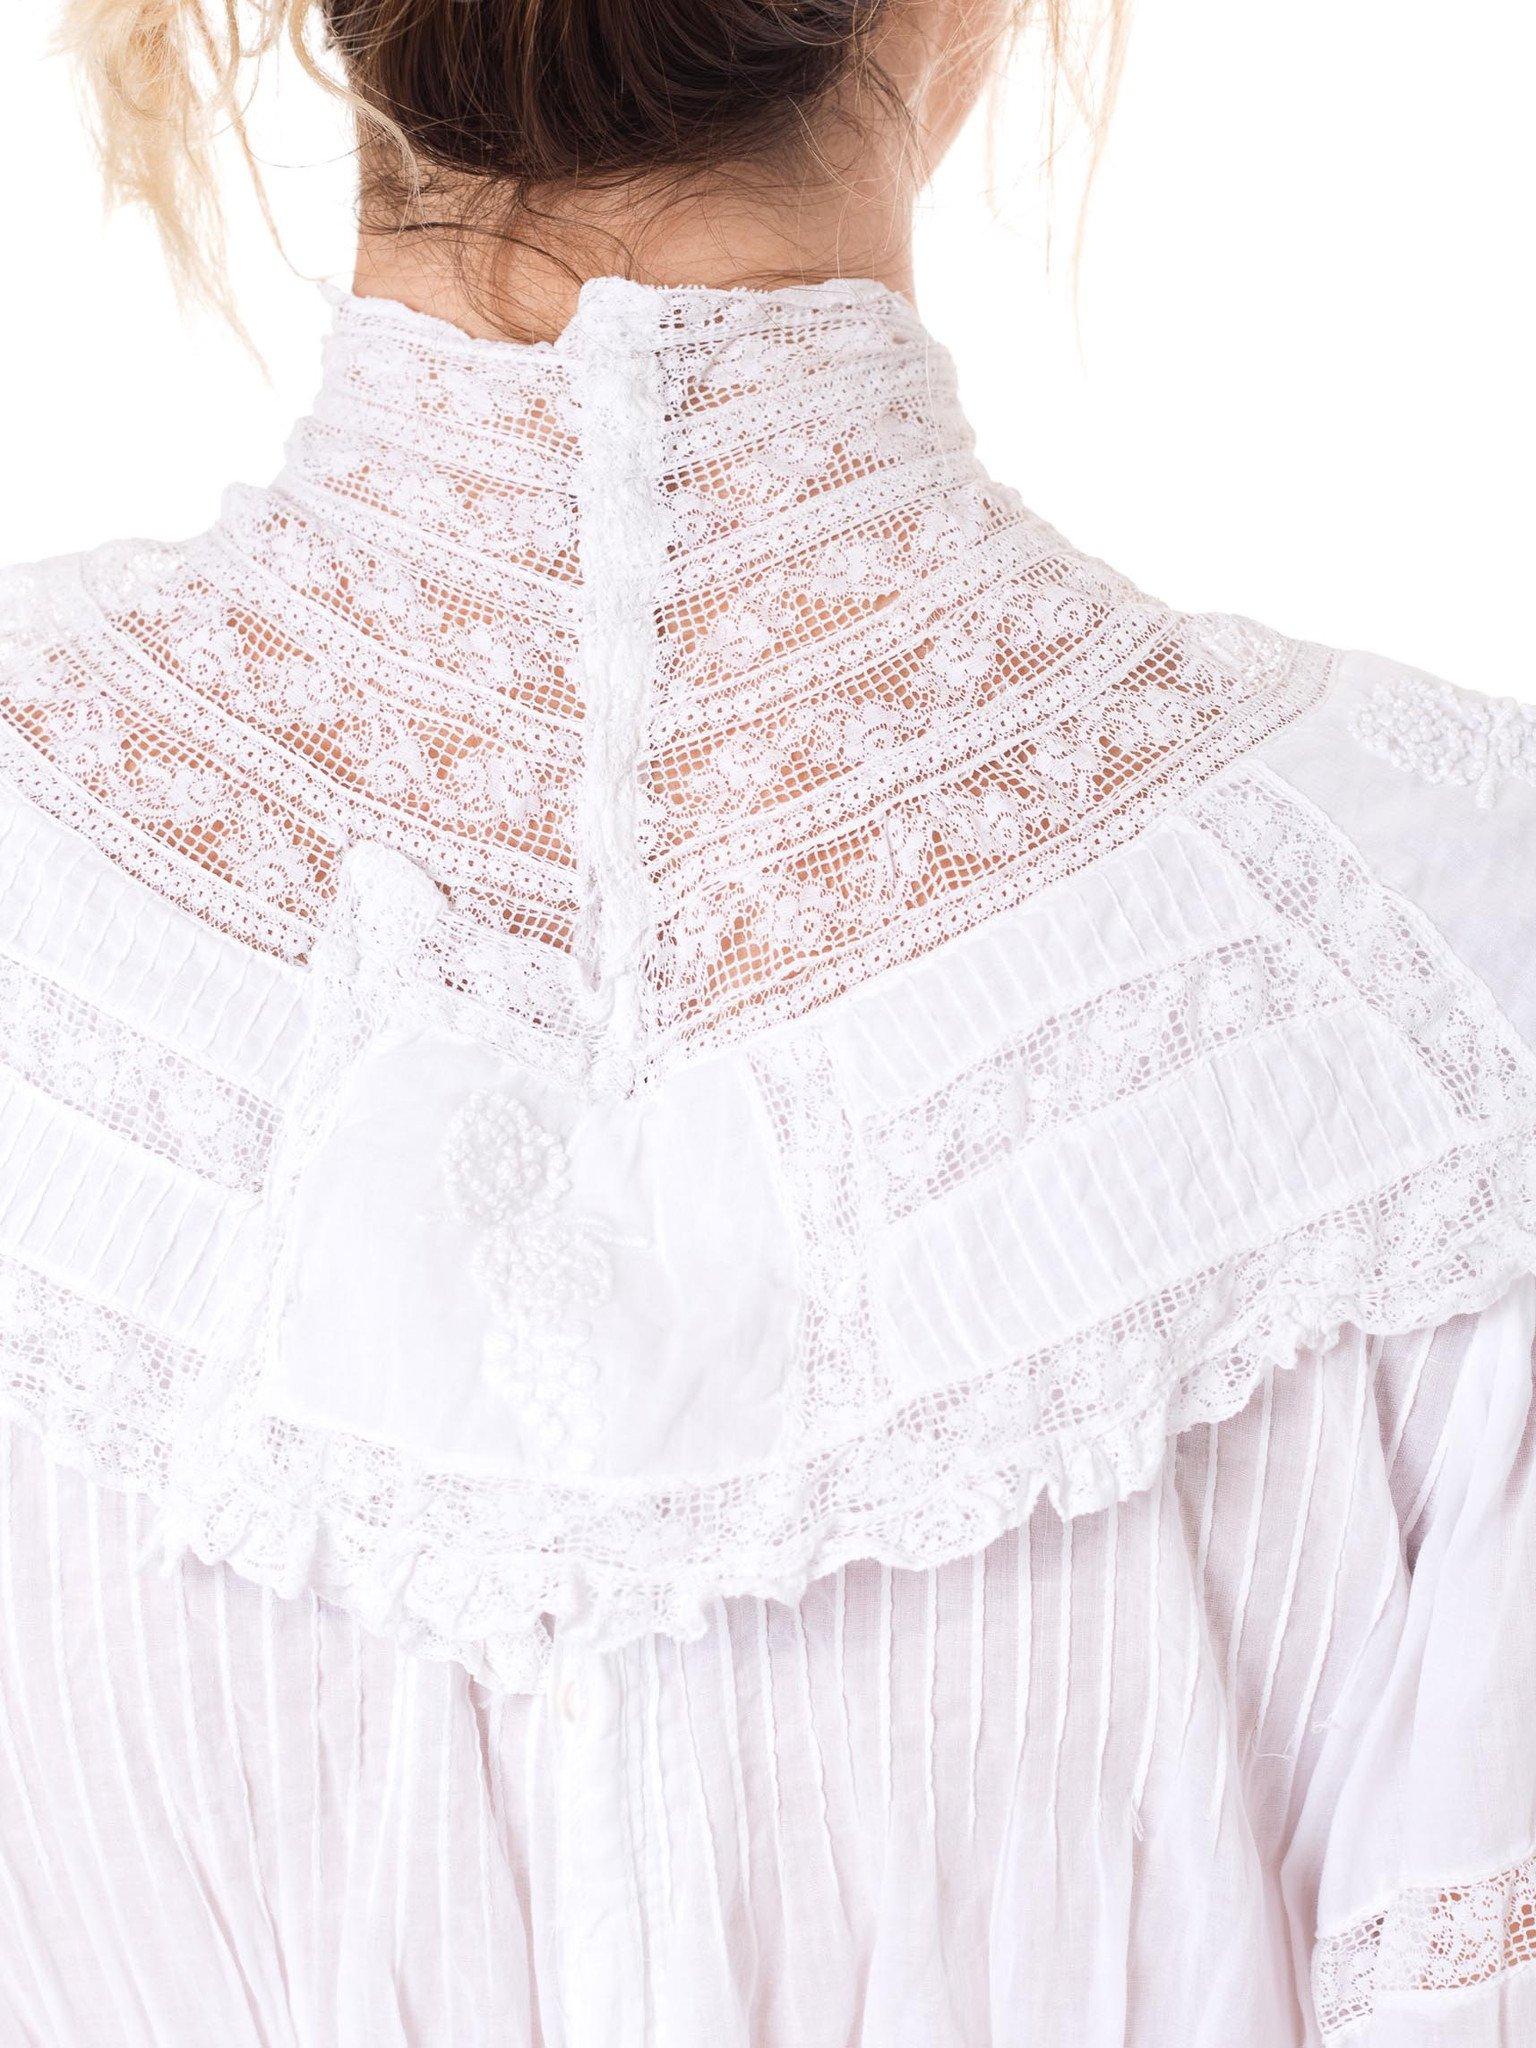 Victorian White Cotton Voile Lace Tea Dress With Half Sleeves 3